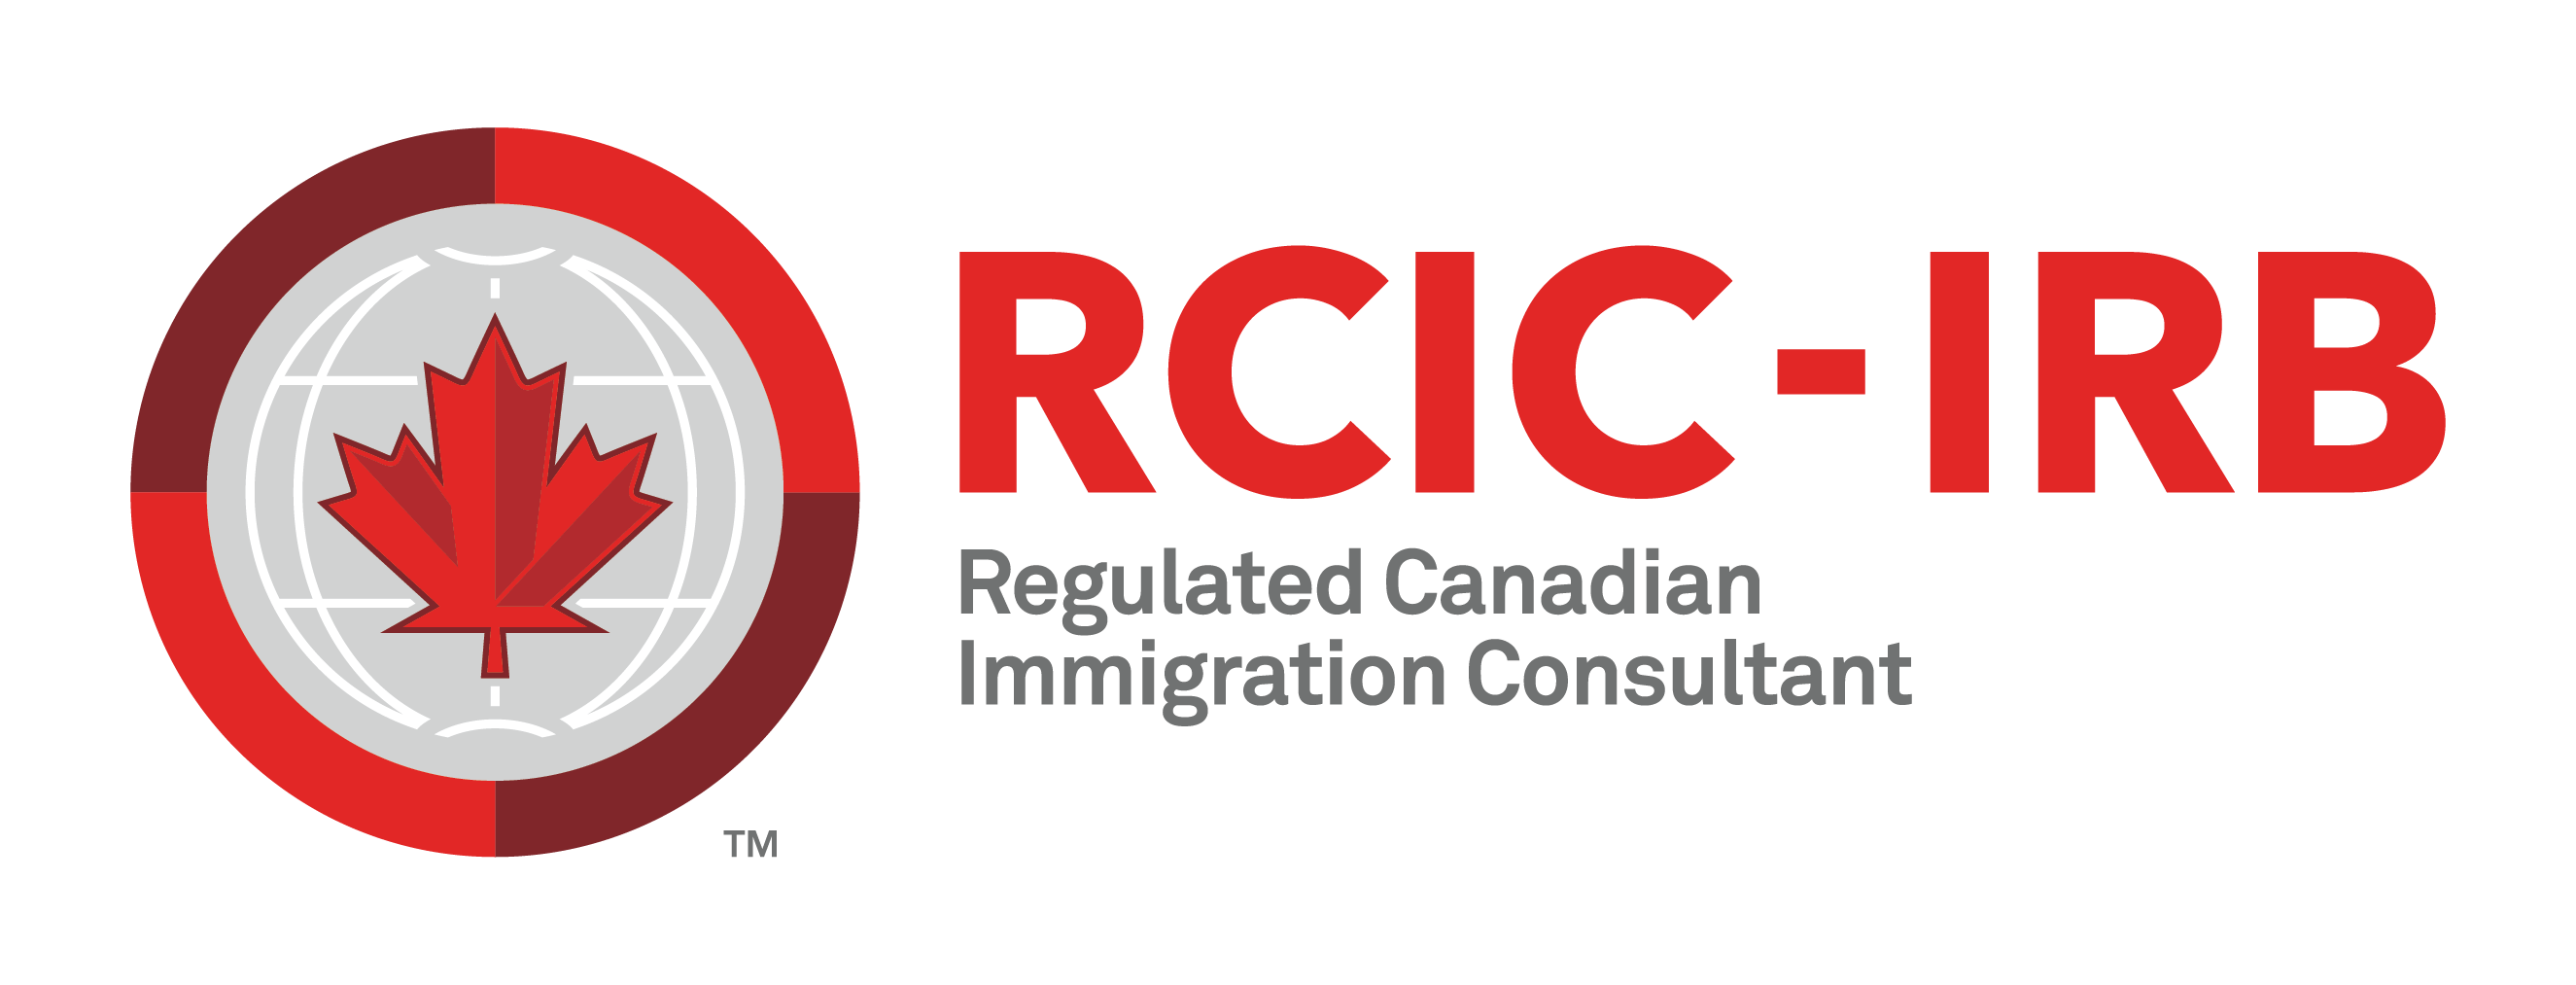 Logo The Immigration Consultants of Canada Regulatory Council